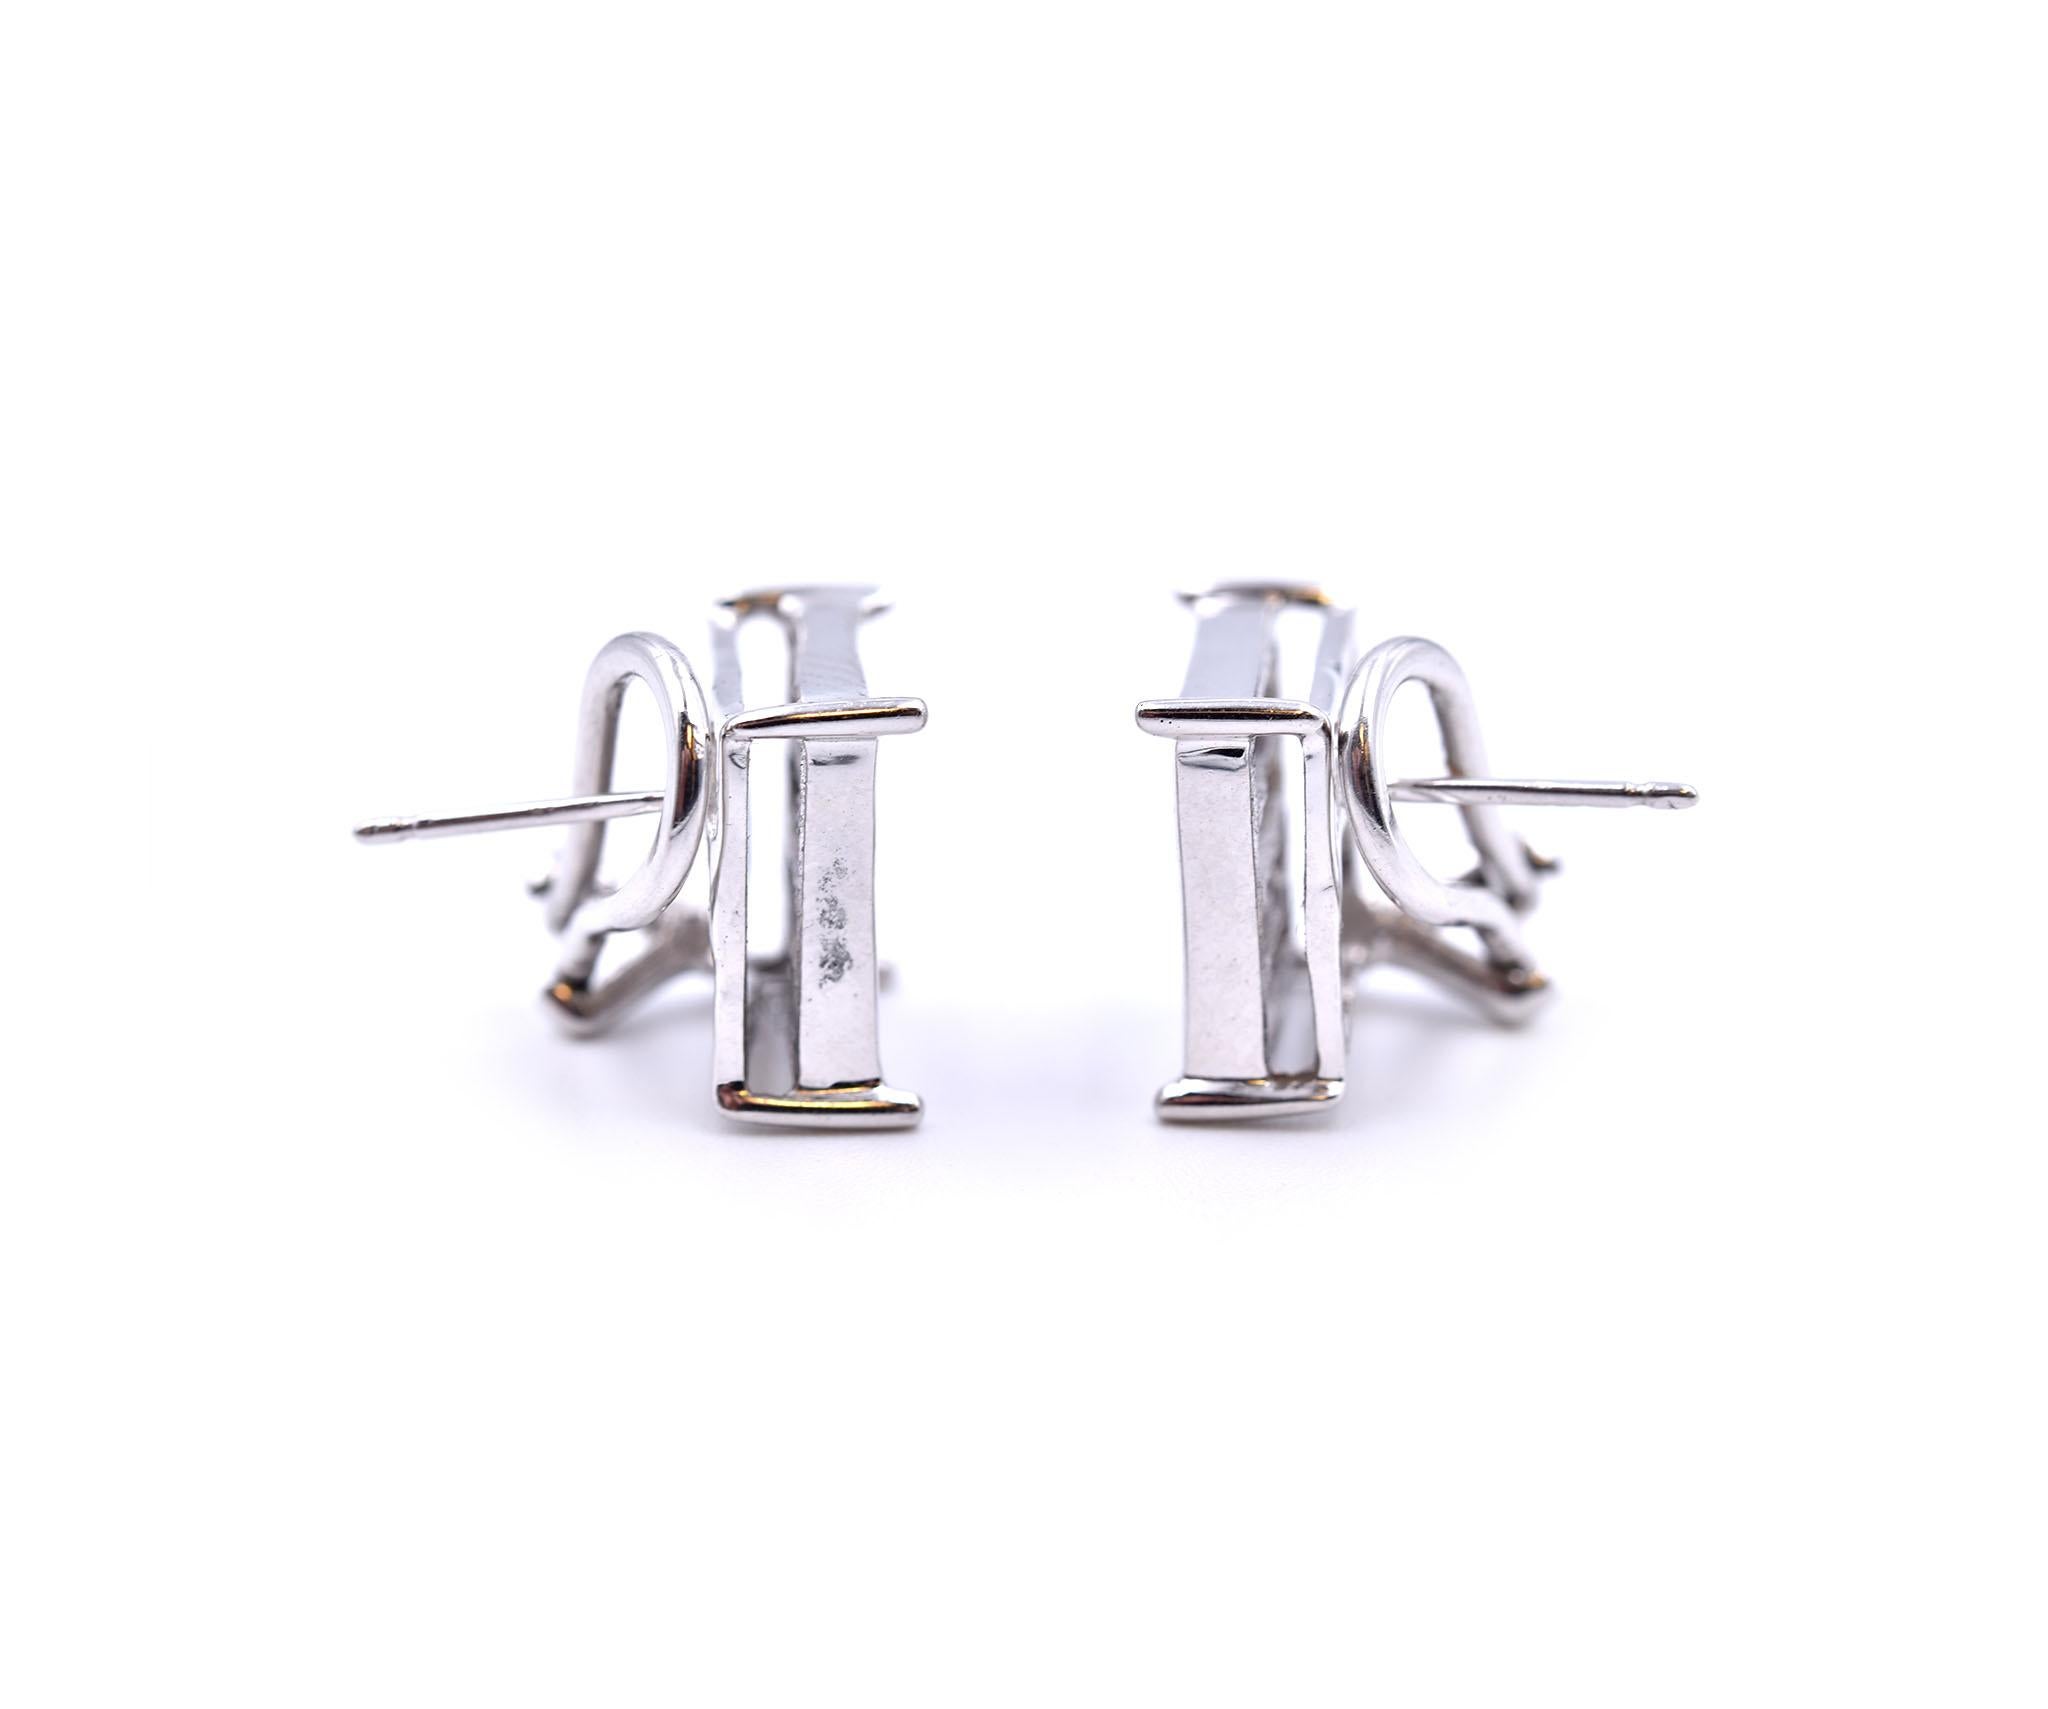 Designer: custom designed
Material: 14k white gold
Diamonds: 32 princess cuts = 3.20cttw
Color: H
Clarity: SI1
Dimensions: earrings measure 12mm by 12mm
Fastenings: post with omega back
Weight: 5.7 grams
